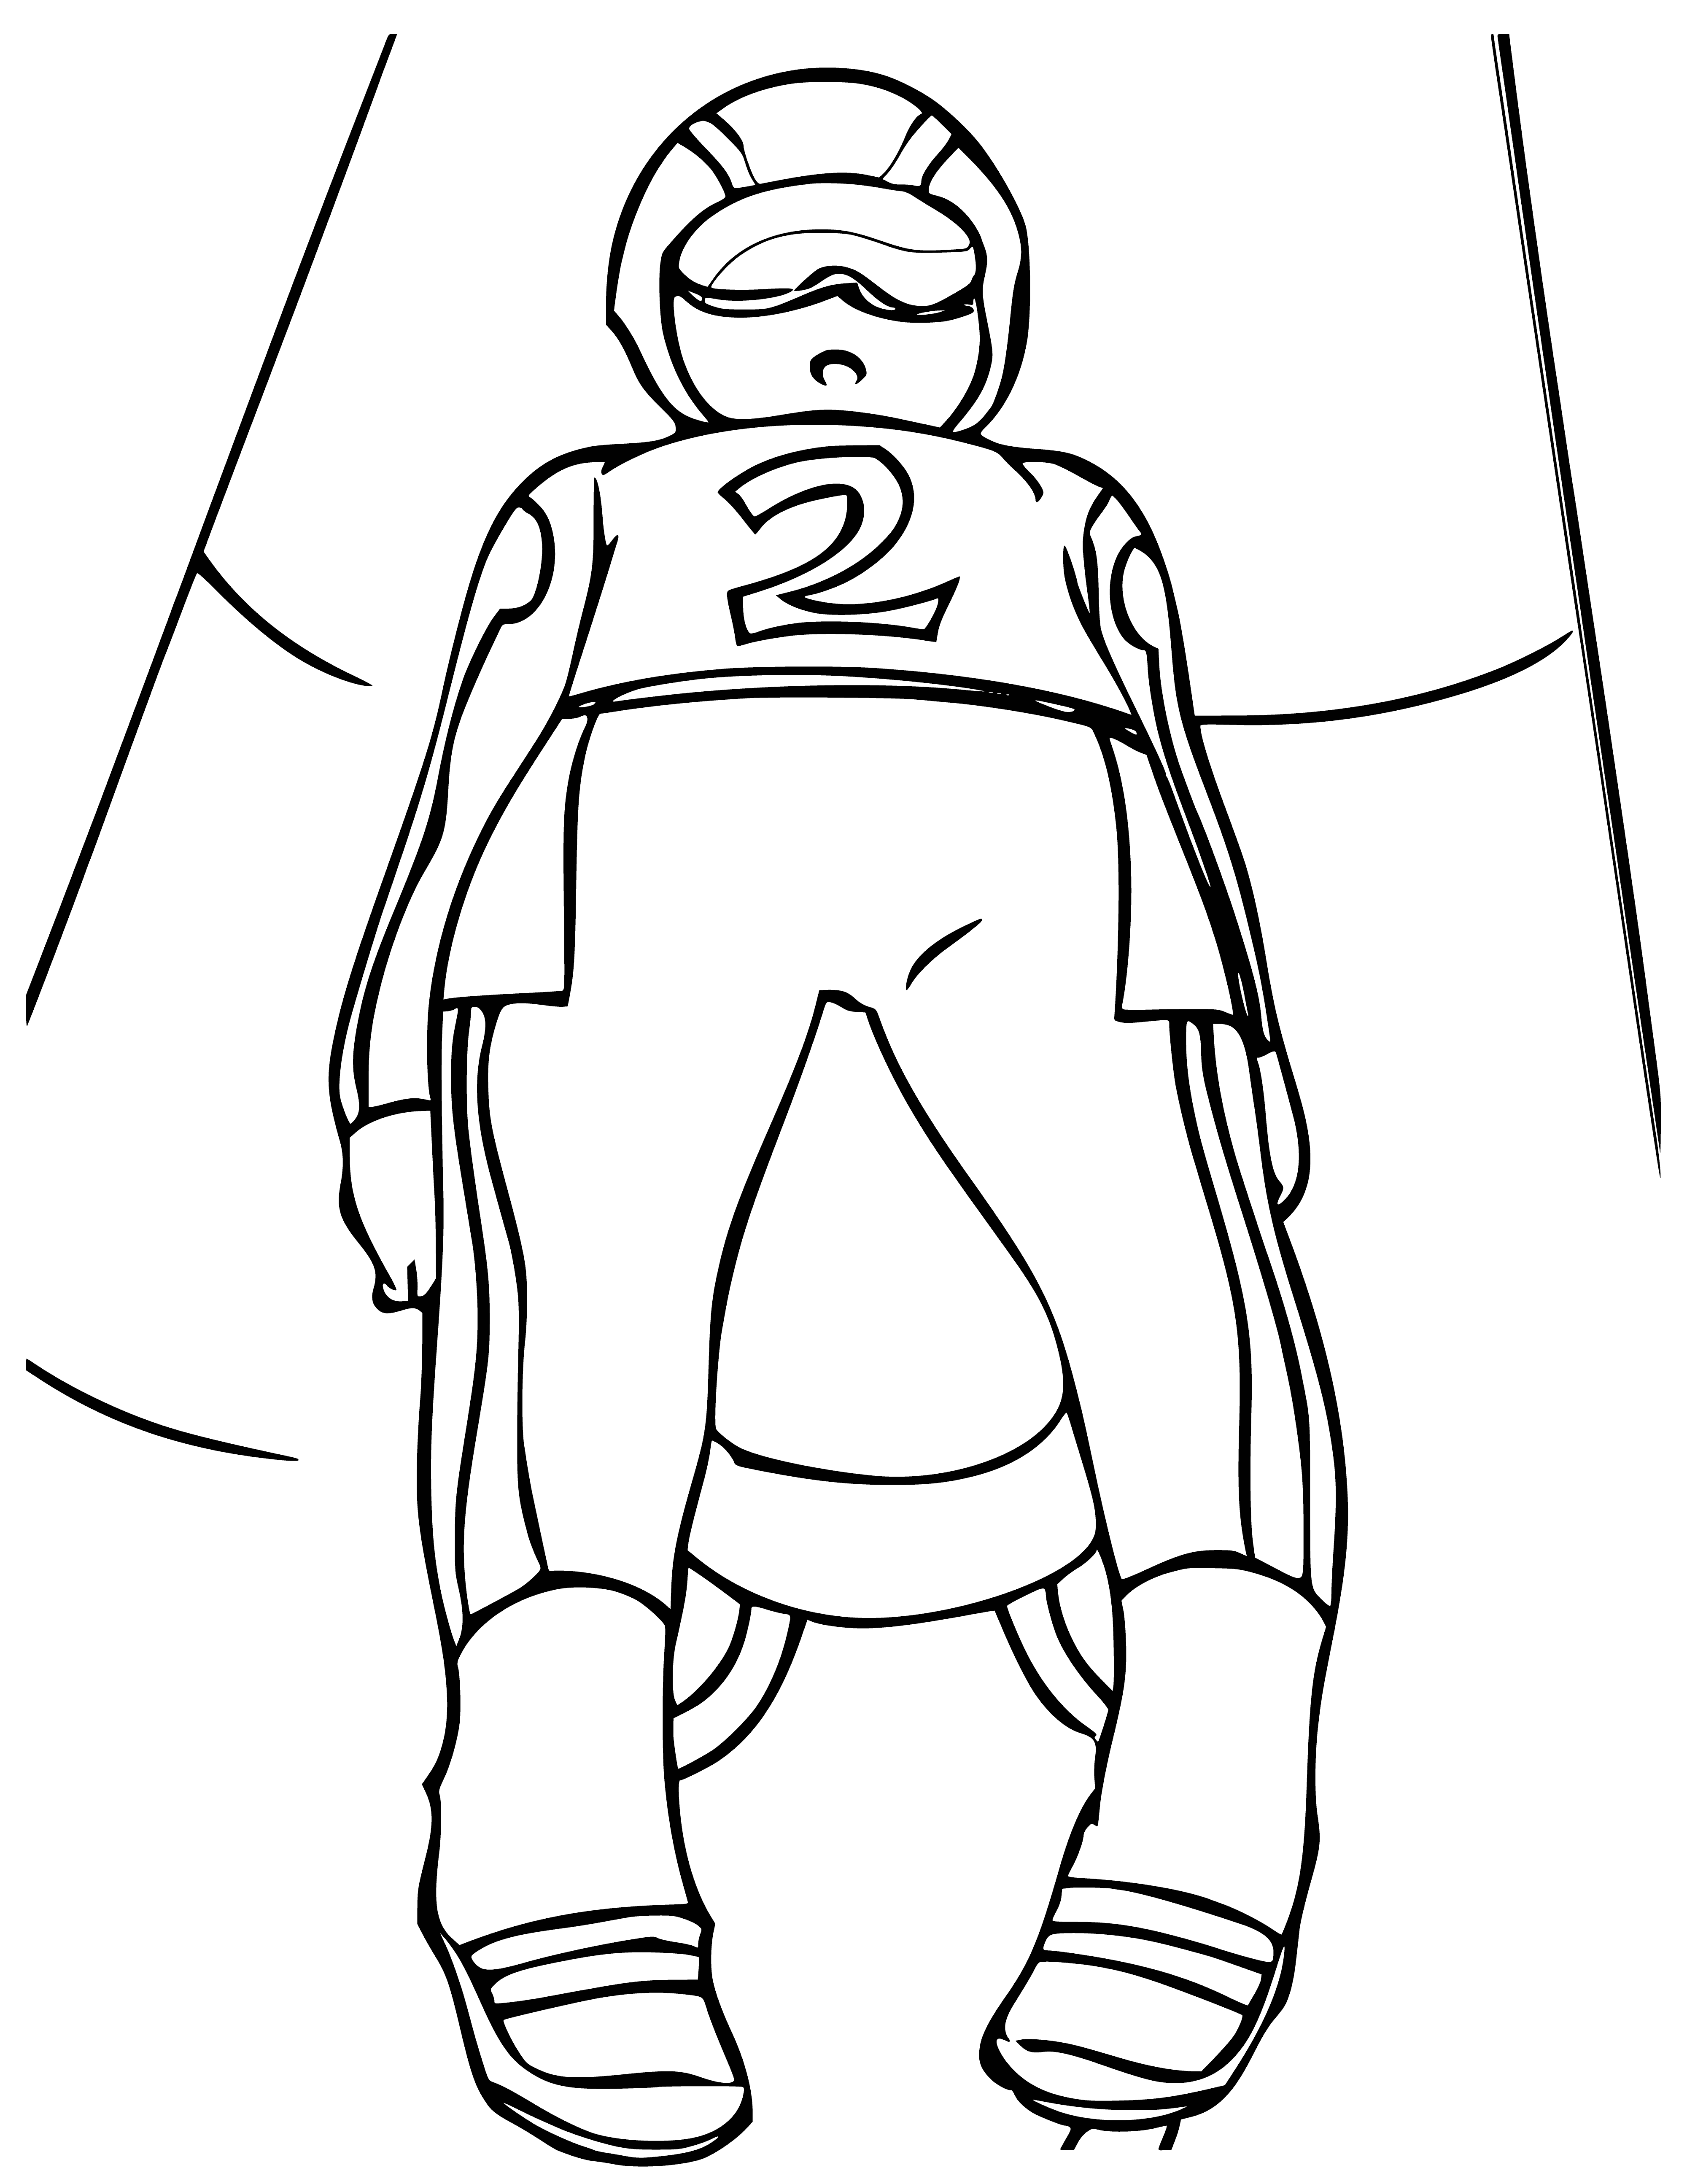 coloring page: Coloring page of luger on sled wearing helmet, gloves, boots with head raised & legs tucked.